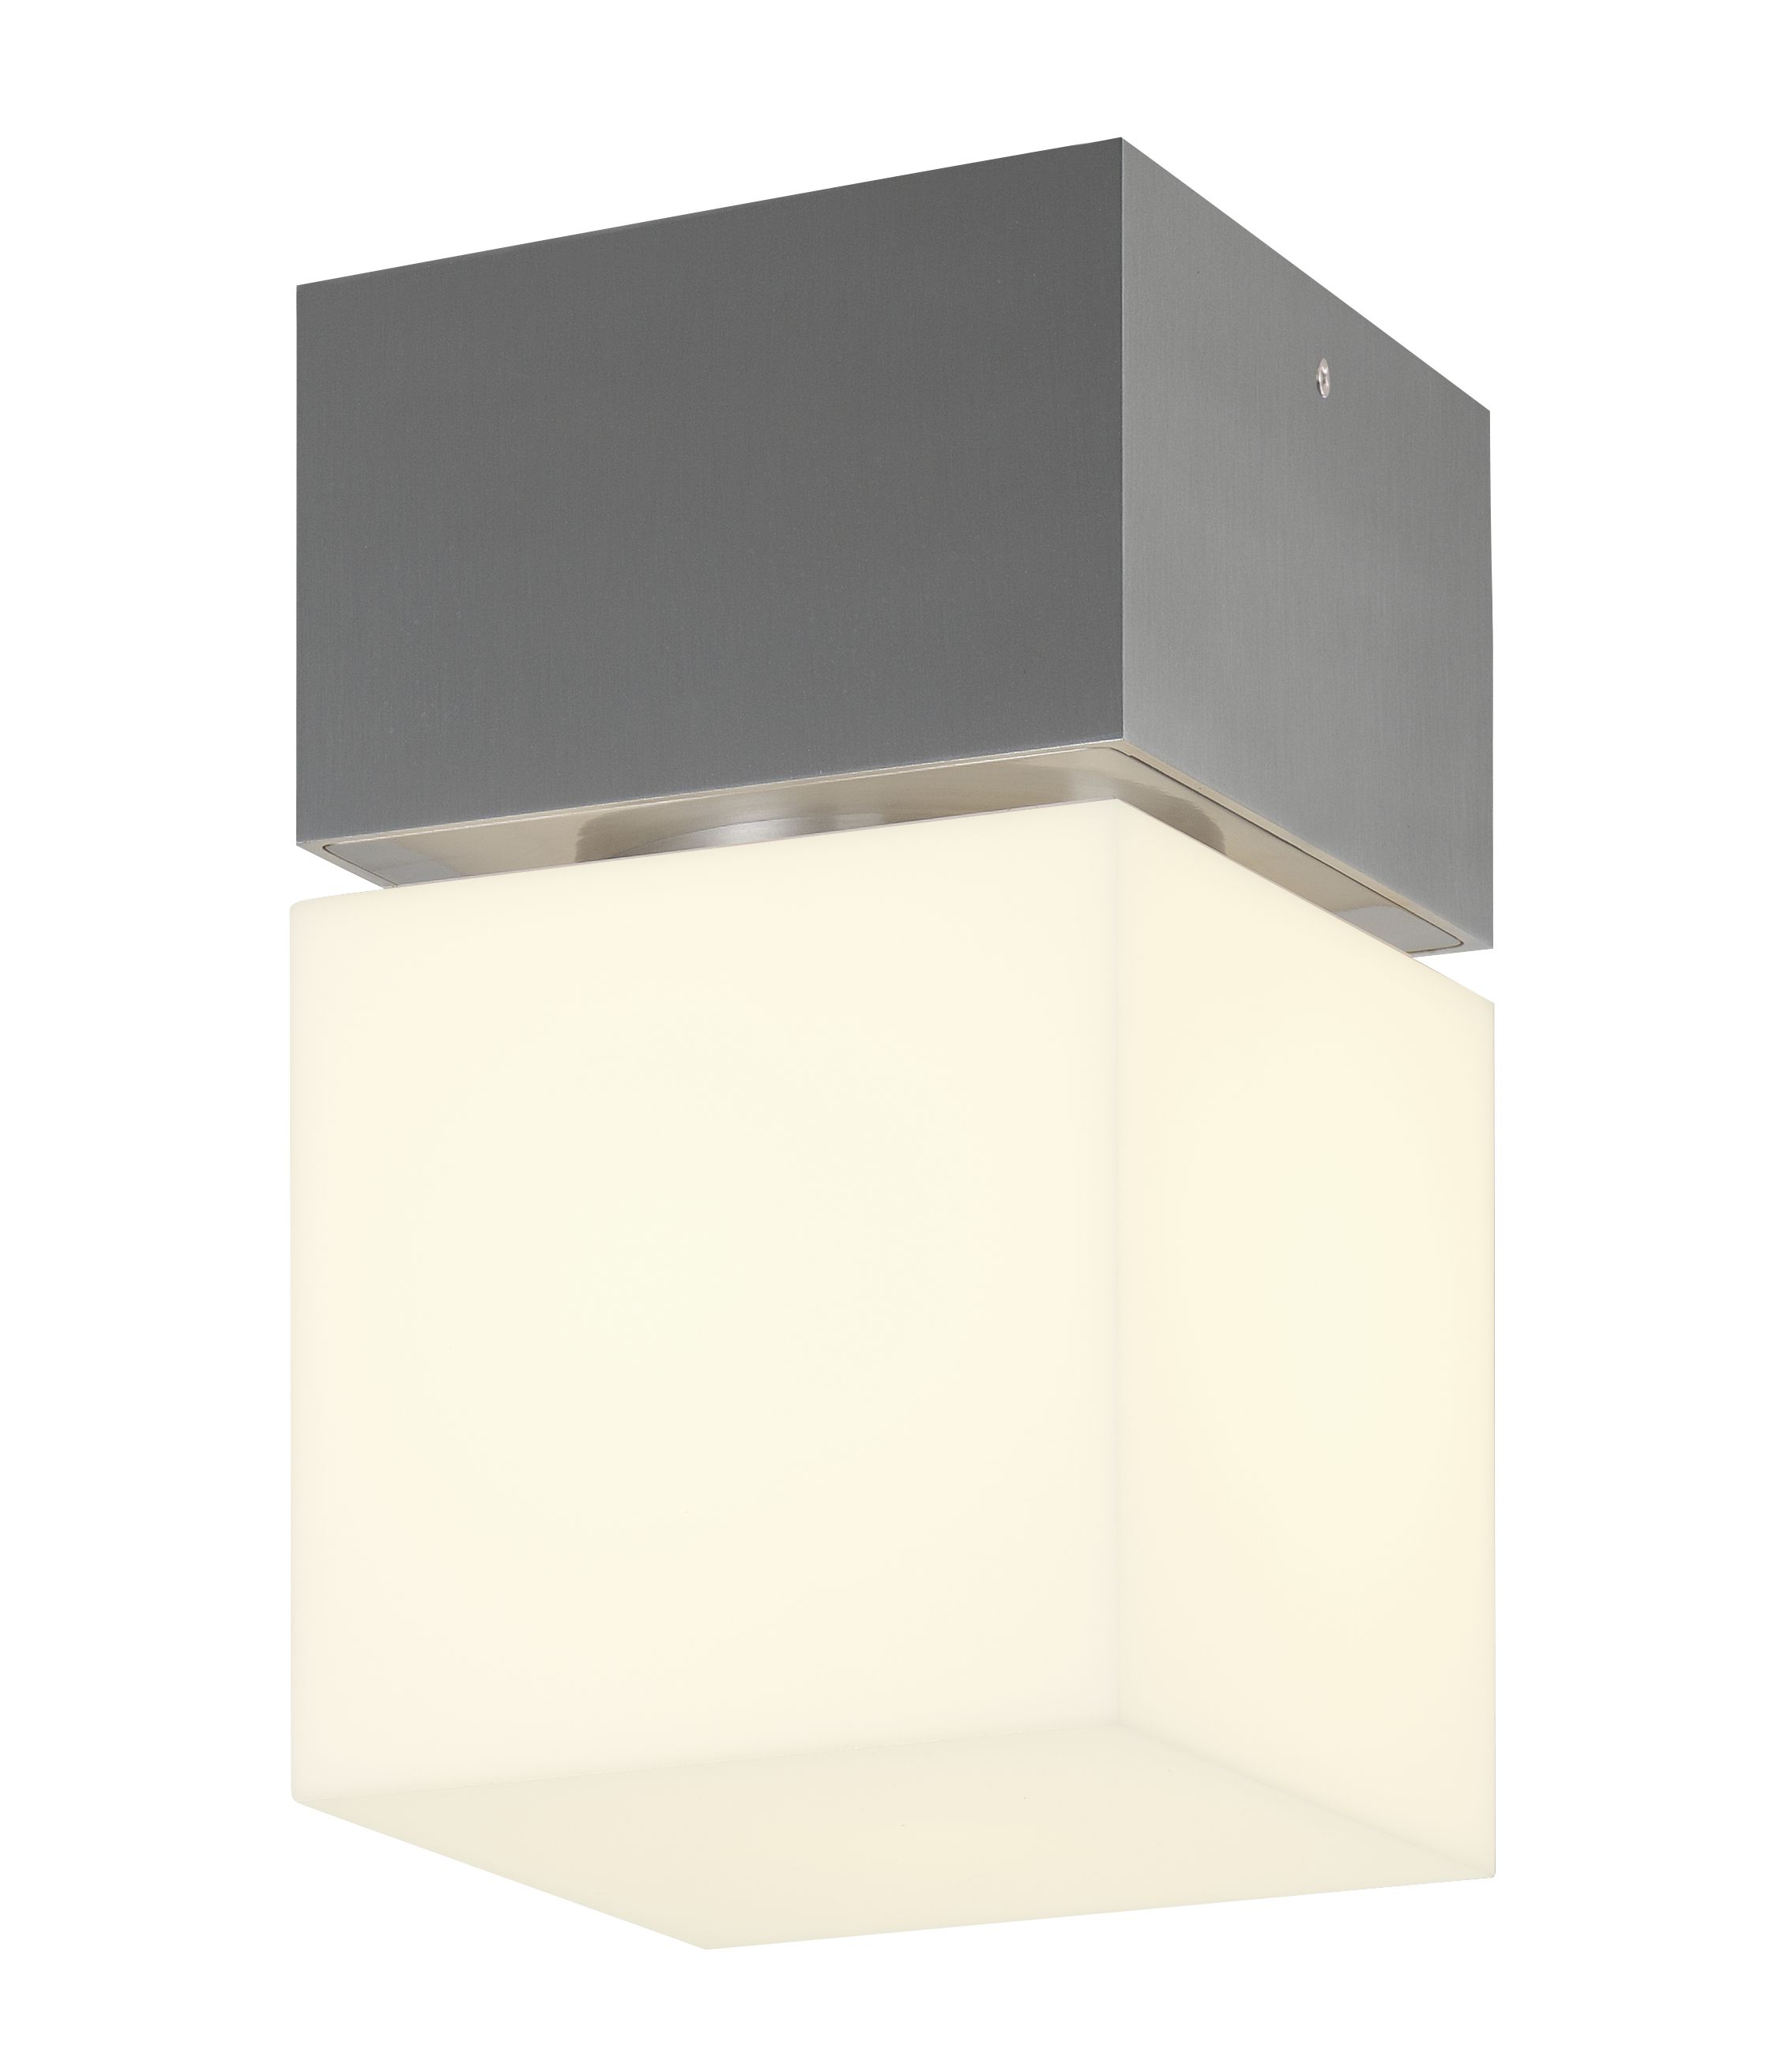 SQUARE C LED,  IP44, stainless steel 316, 3000K